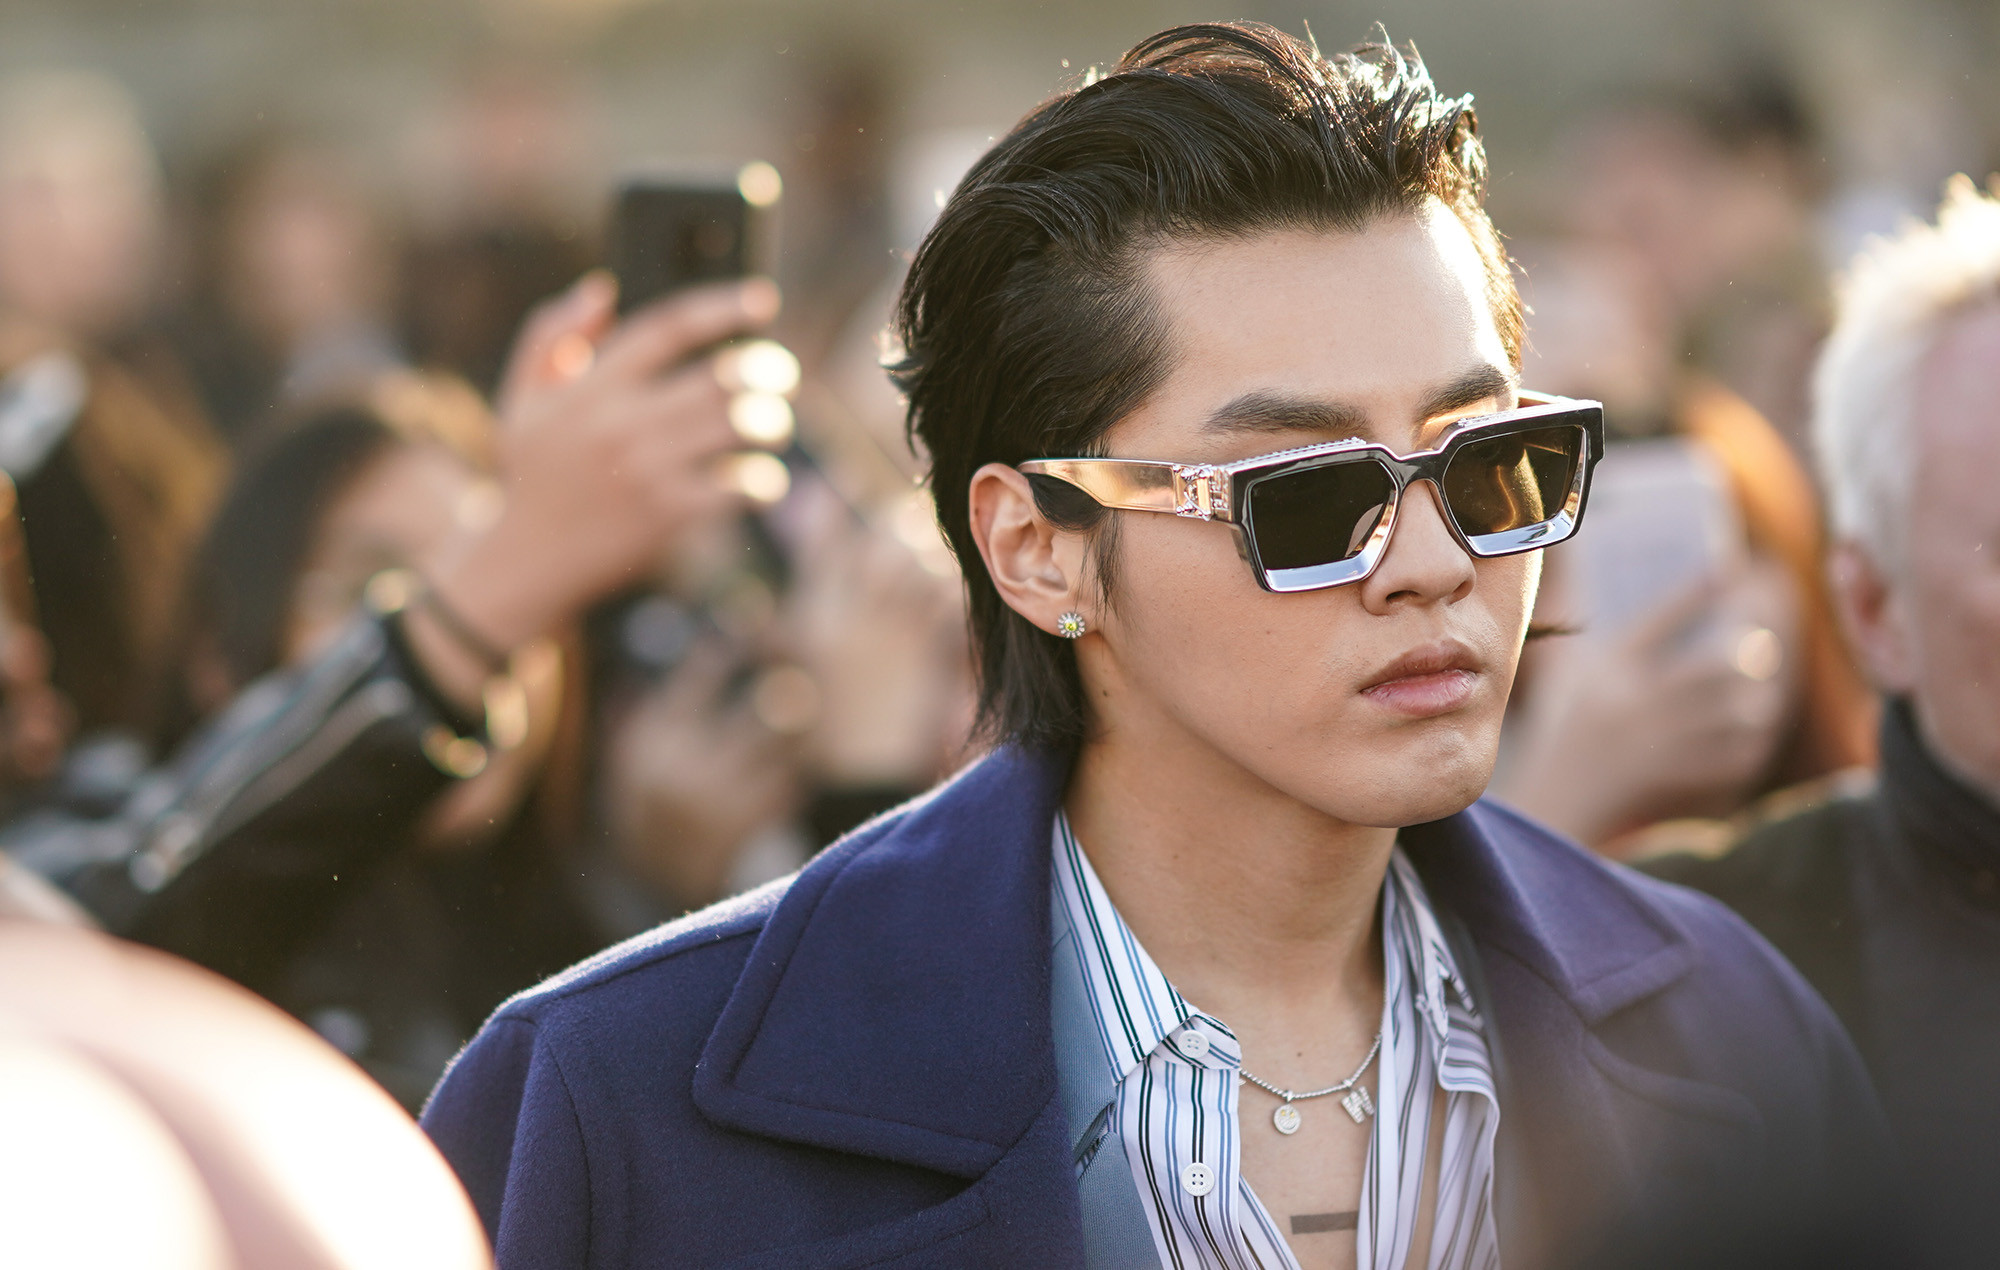 Chinese star Kris Wu sentenced to 13 years in prison for rape